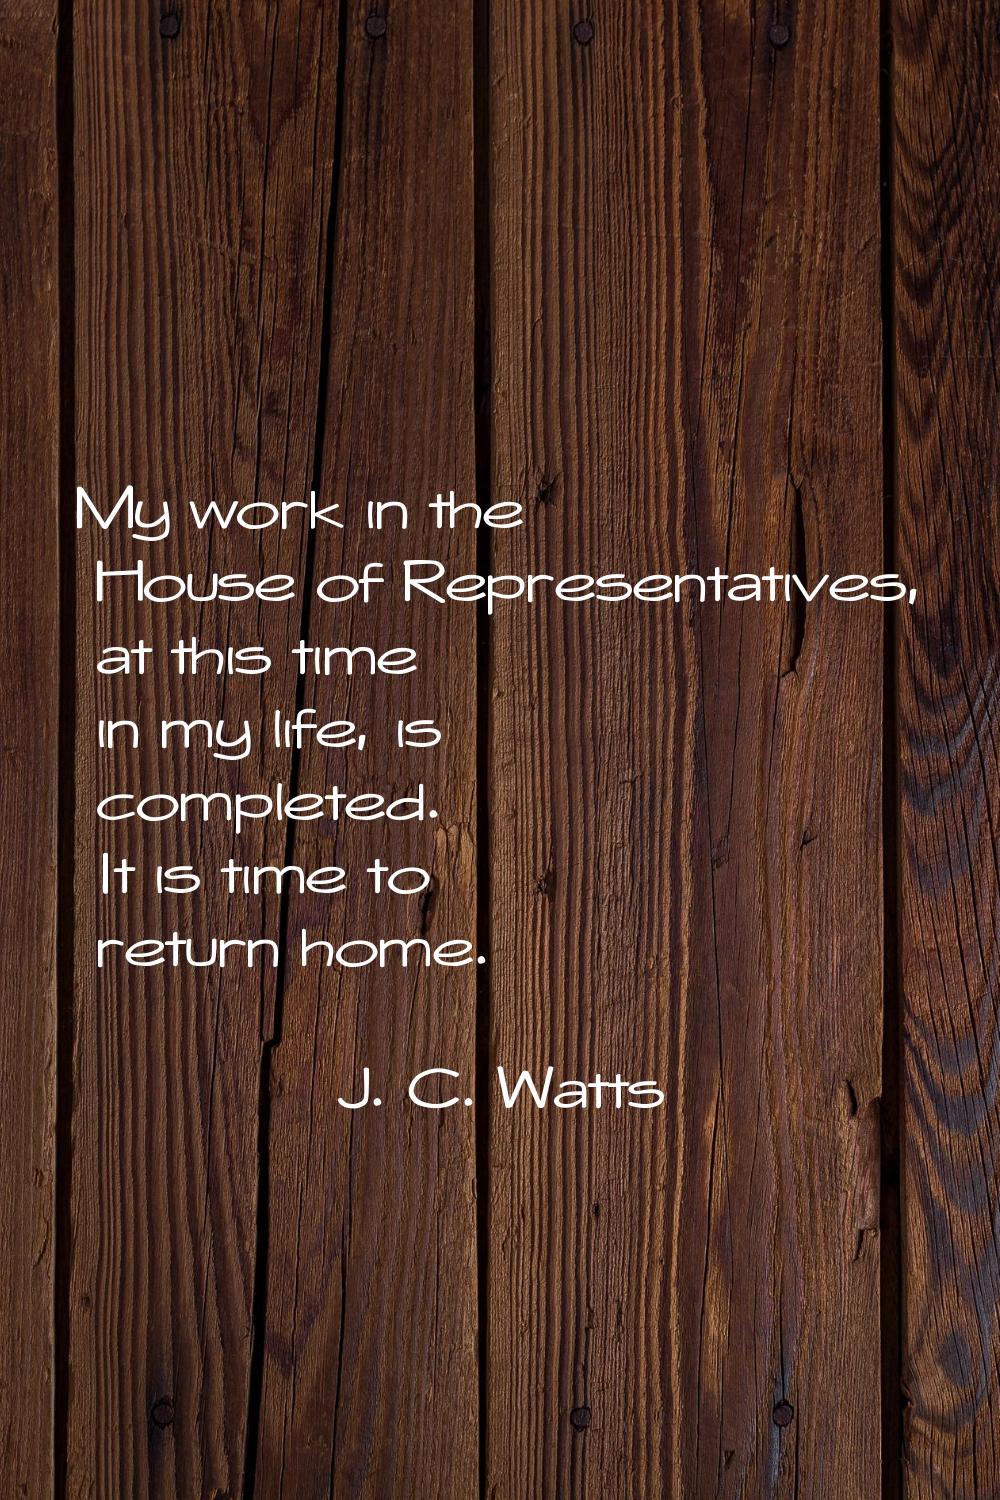 My work in the House of Representatives, at this time in my life, is completed. It is time to retur